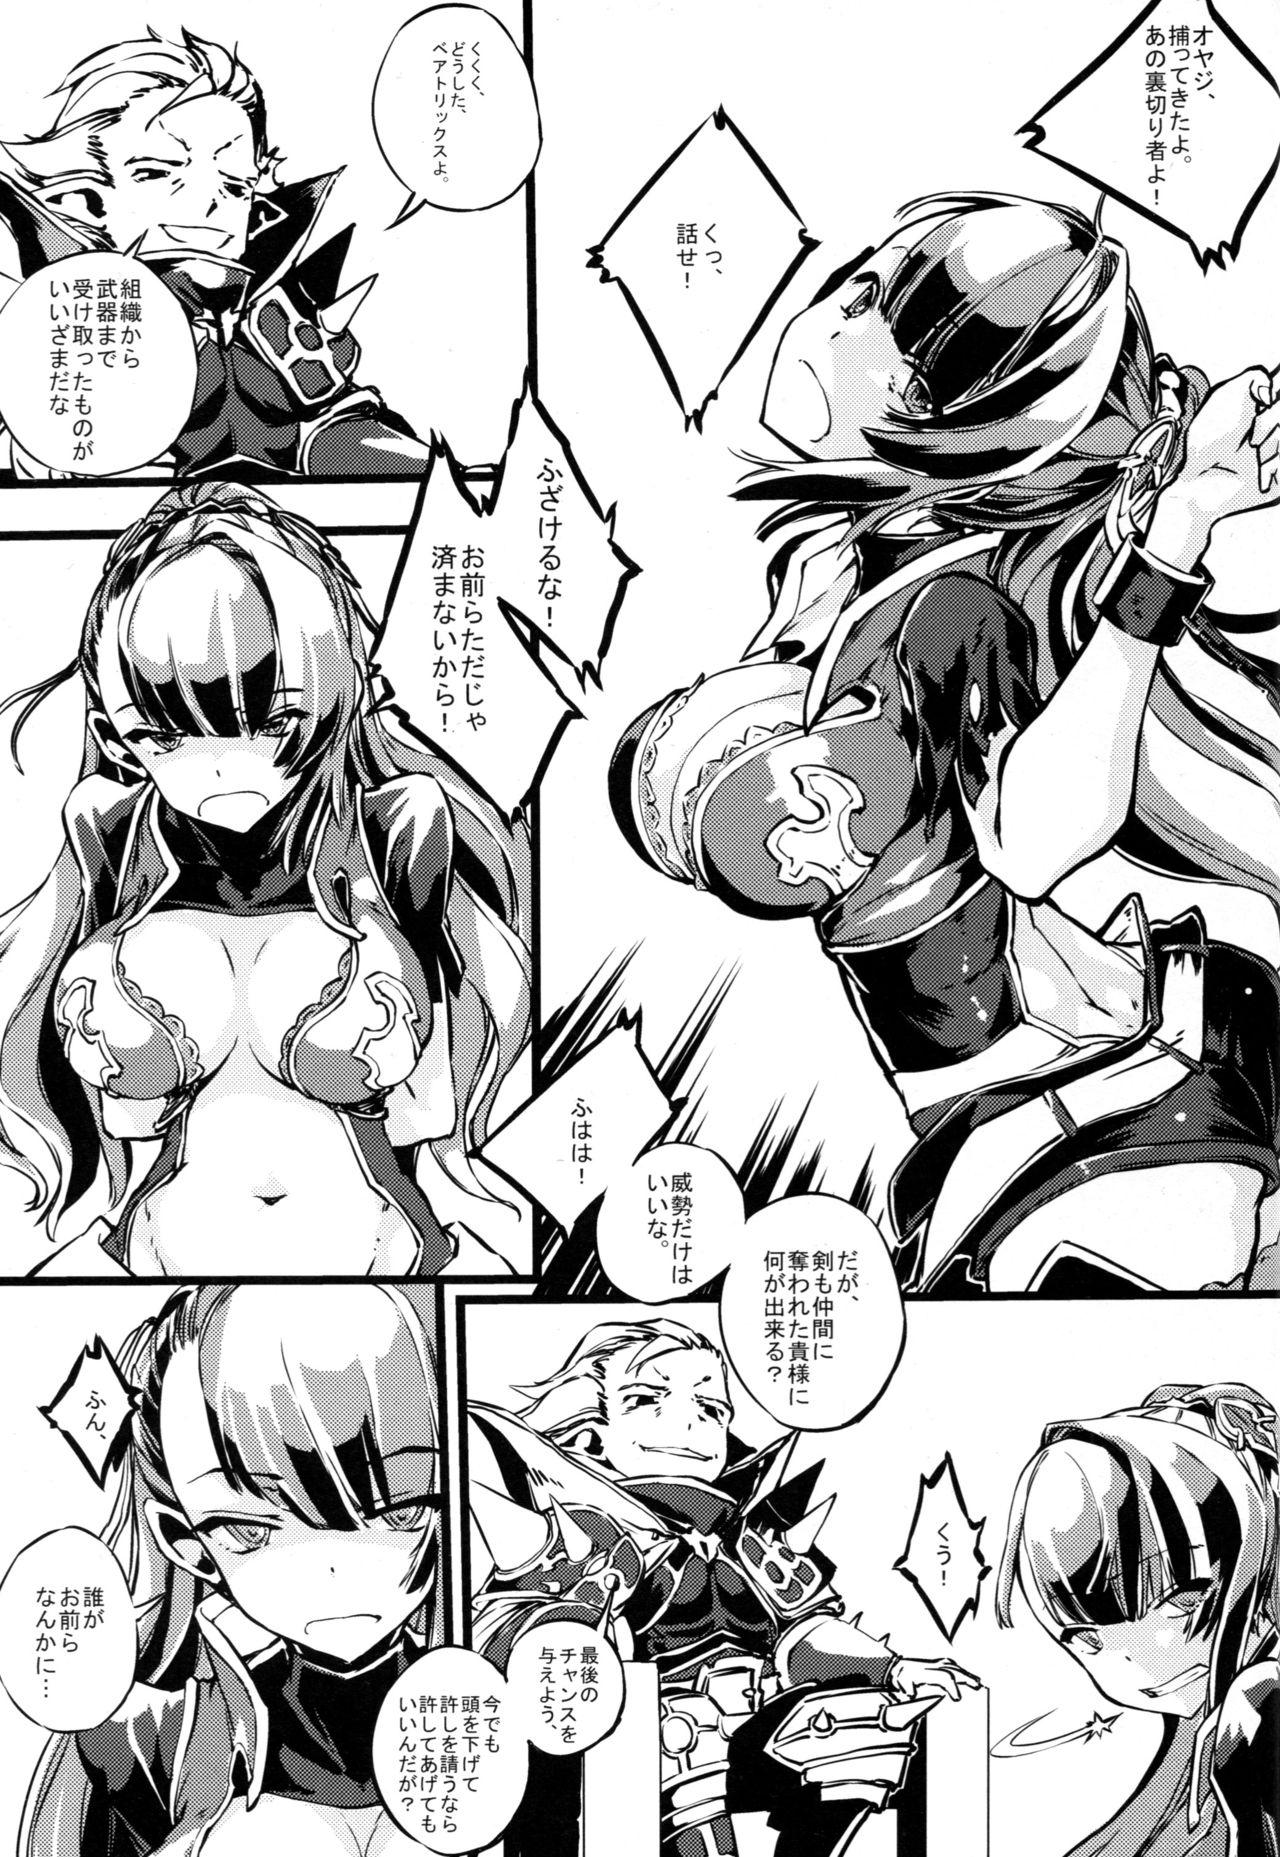 Perfect Butt Bad End Catharsis Vol.3 - Granblue fantasy Jerk - Page 2